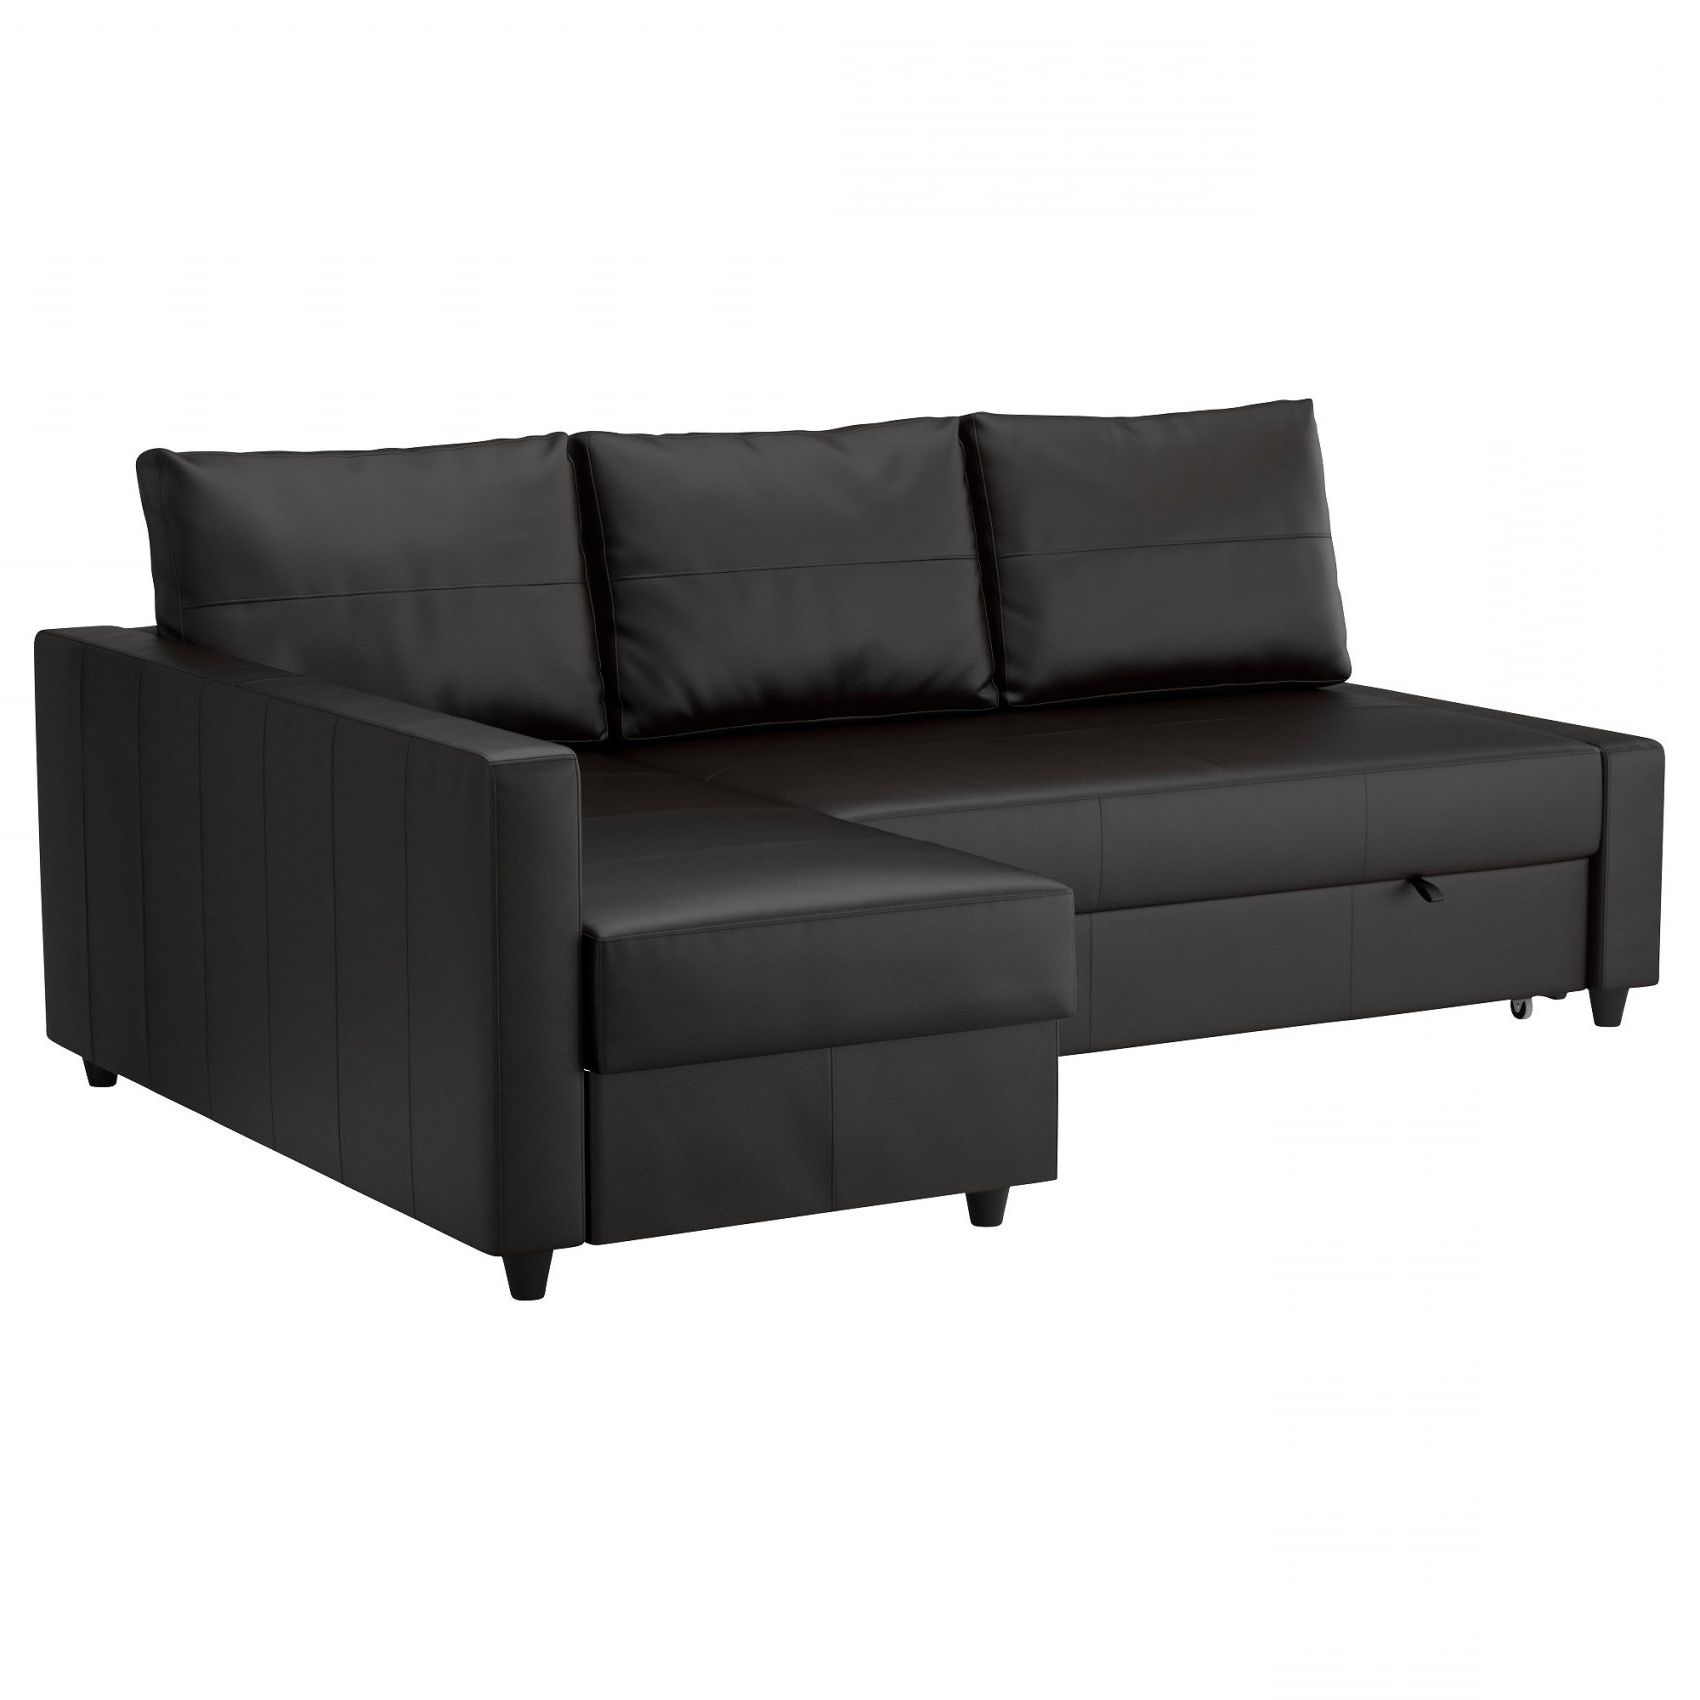 Well Liked Chaise Lounge Sleeper Sofas Regarding Chaise Lounge Sofa Sleeper (View 5 of 15)